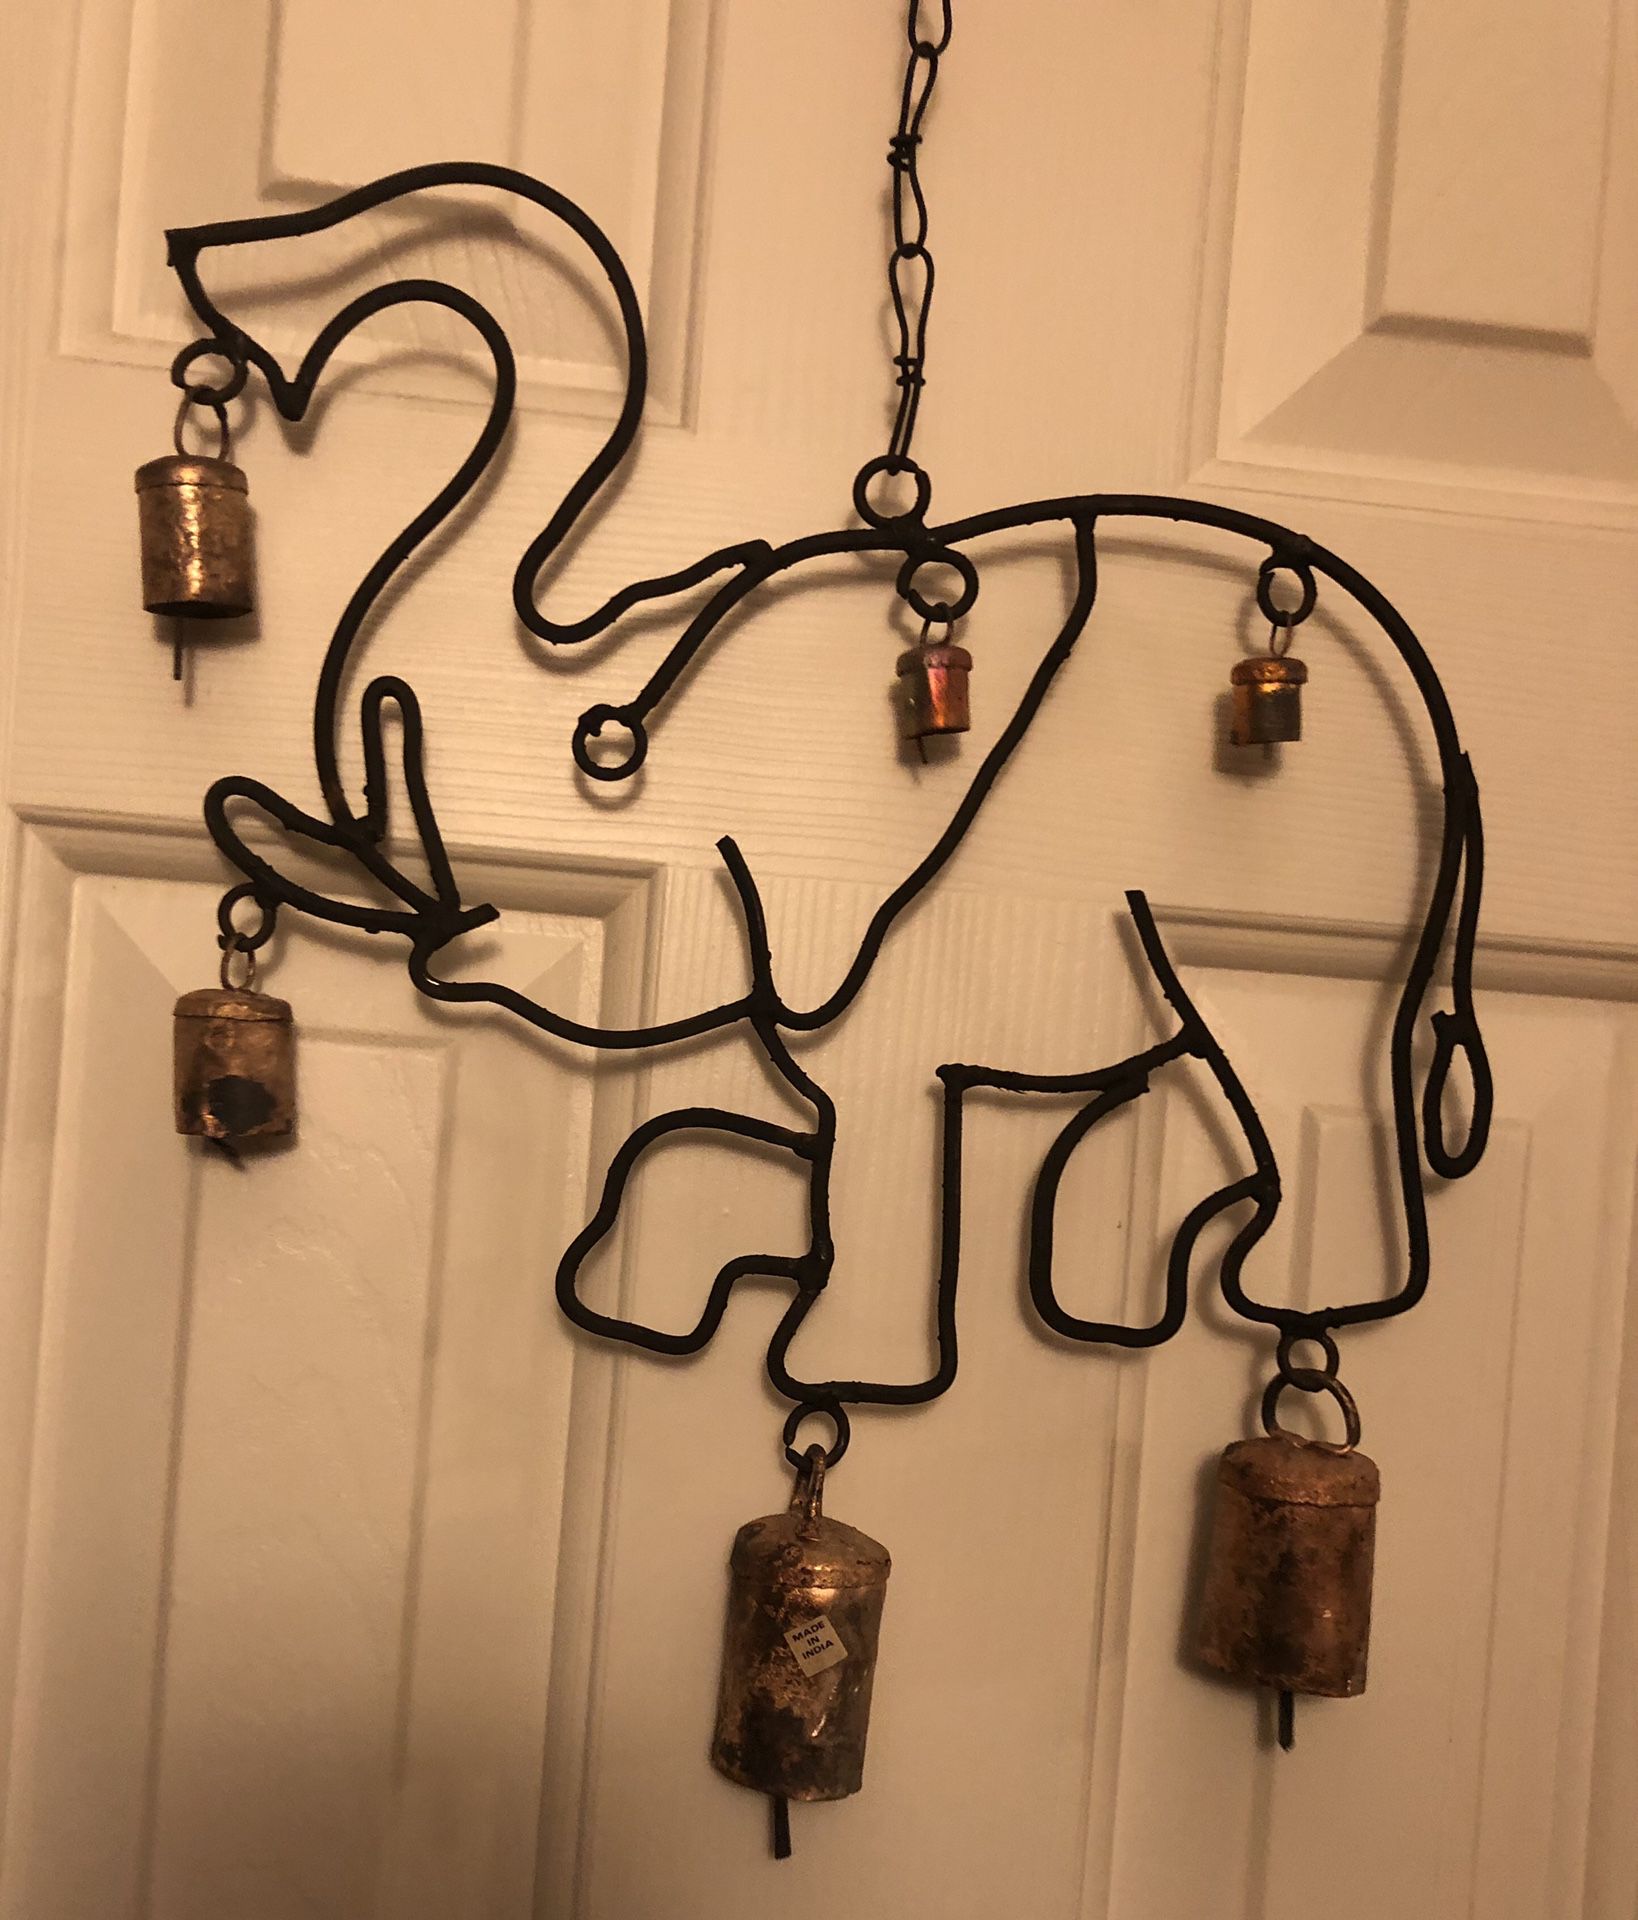 18” tall HAPPY GOOD LUCK ELEPHANT WINDCHIME. 12” wide x 18” tall (including chain)